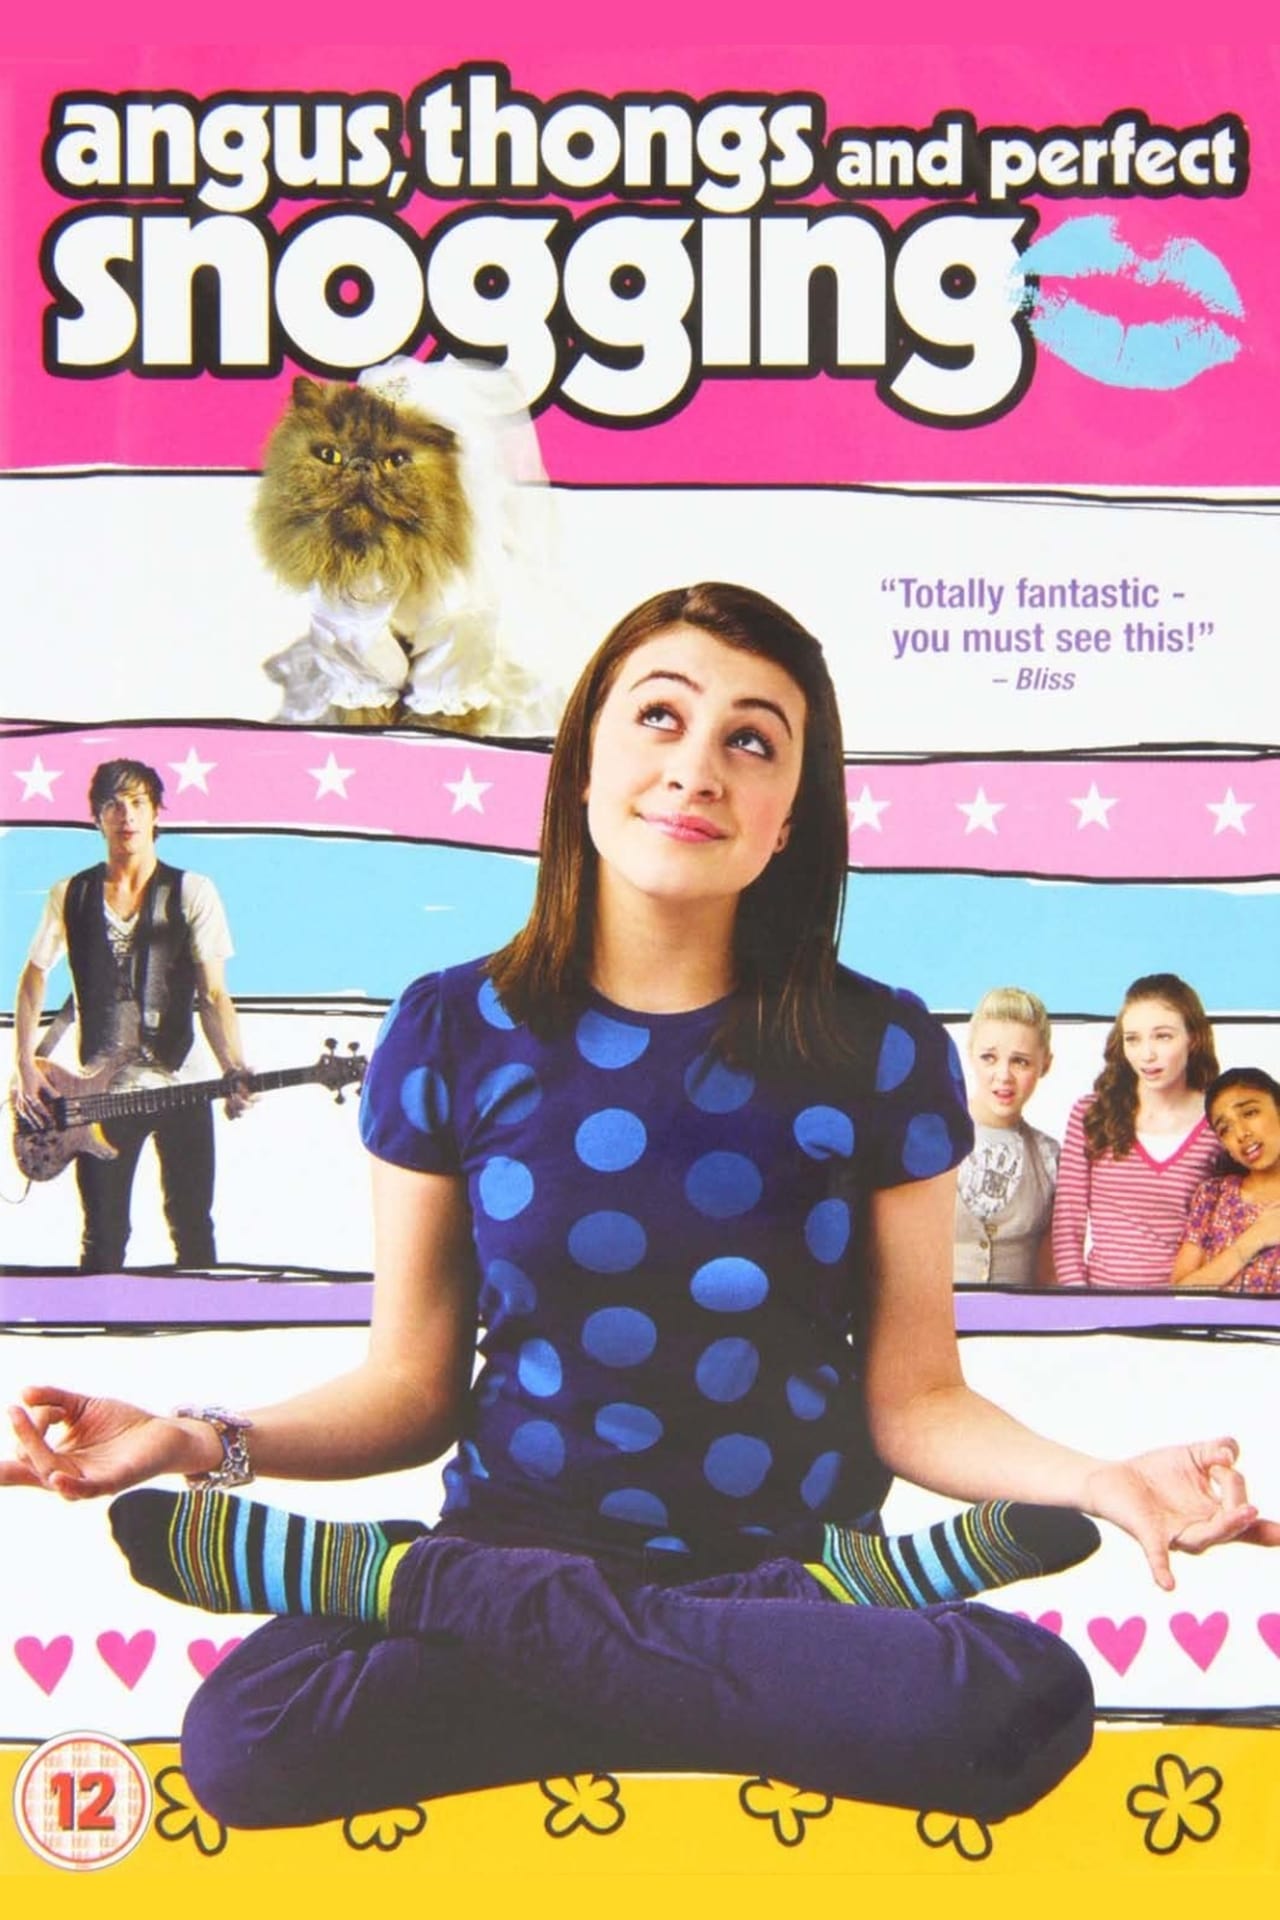 Angus, Thongs and Perfect Snogging (2008) 640Kbps 23.976Fps 48Khz 5.1Ch DD+ NF E-AC3 Turkish Audio TAC